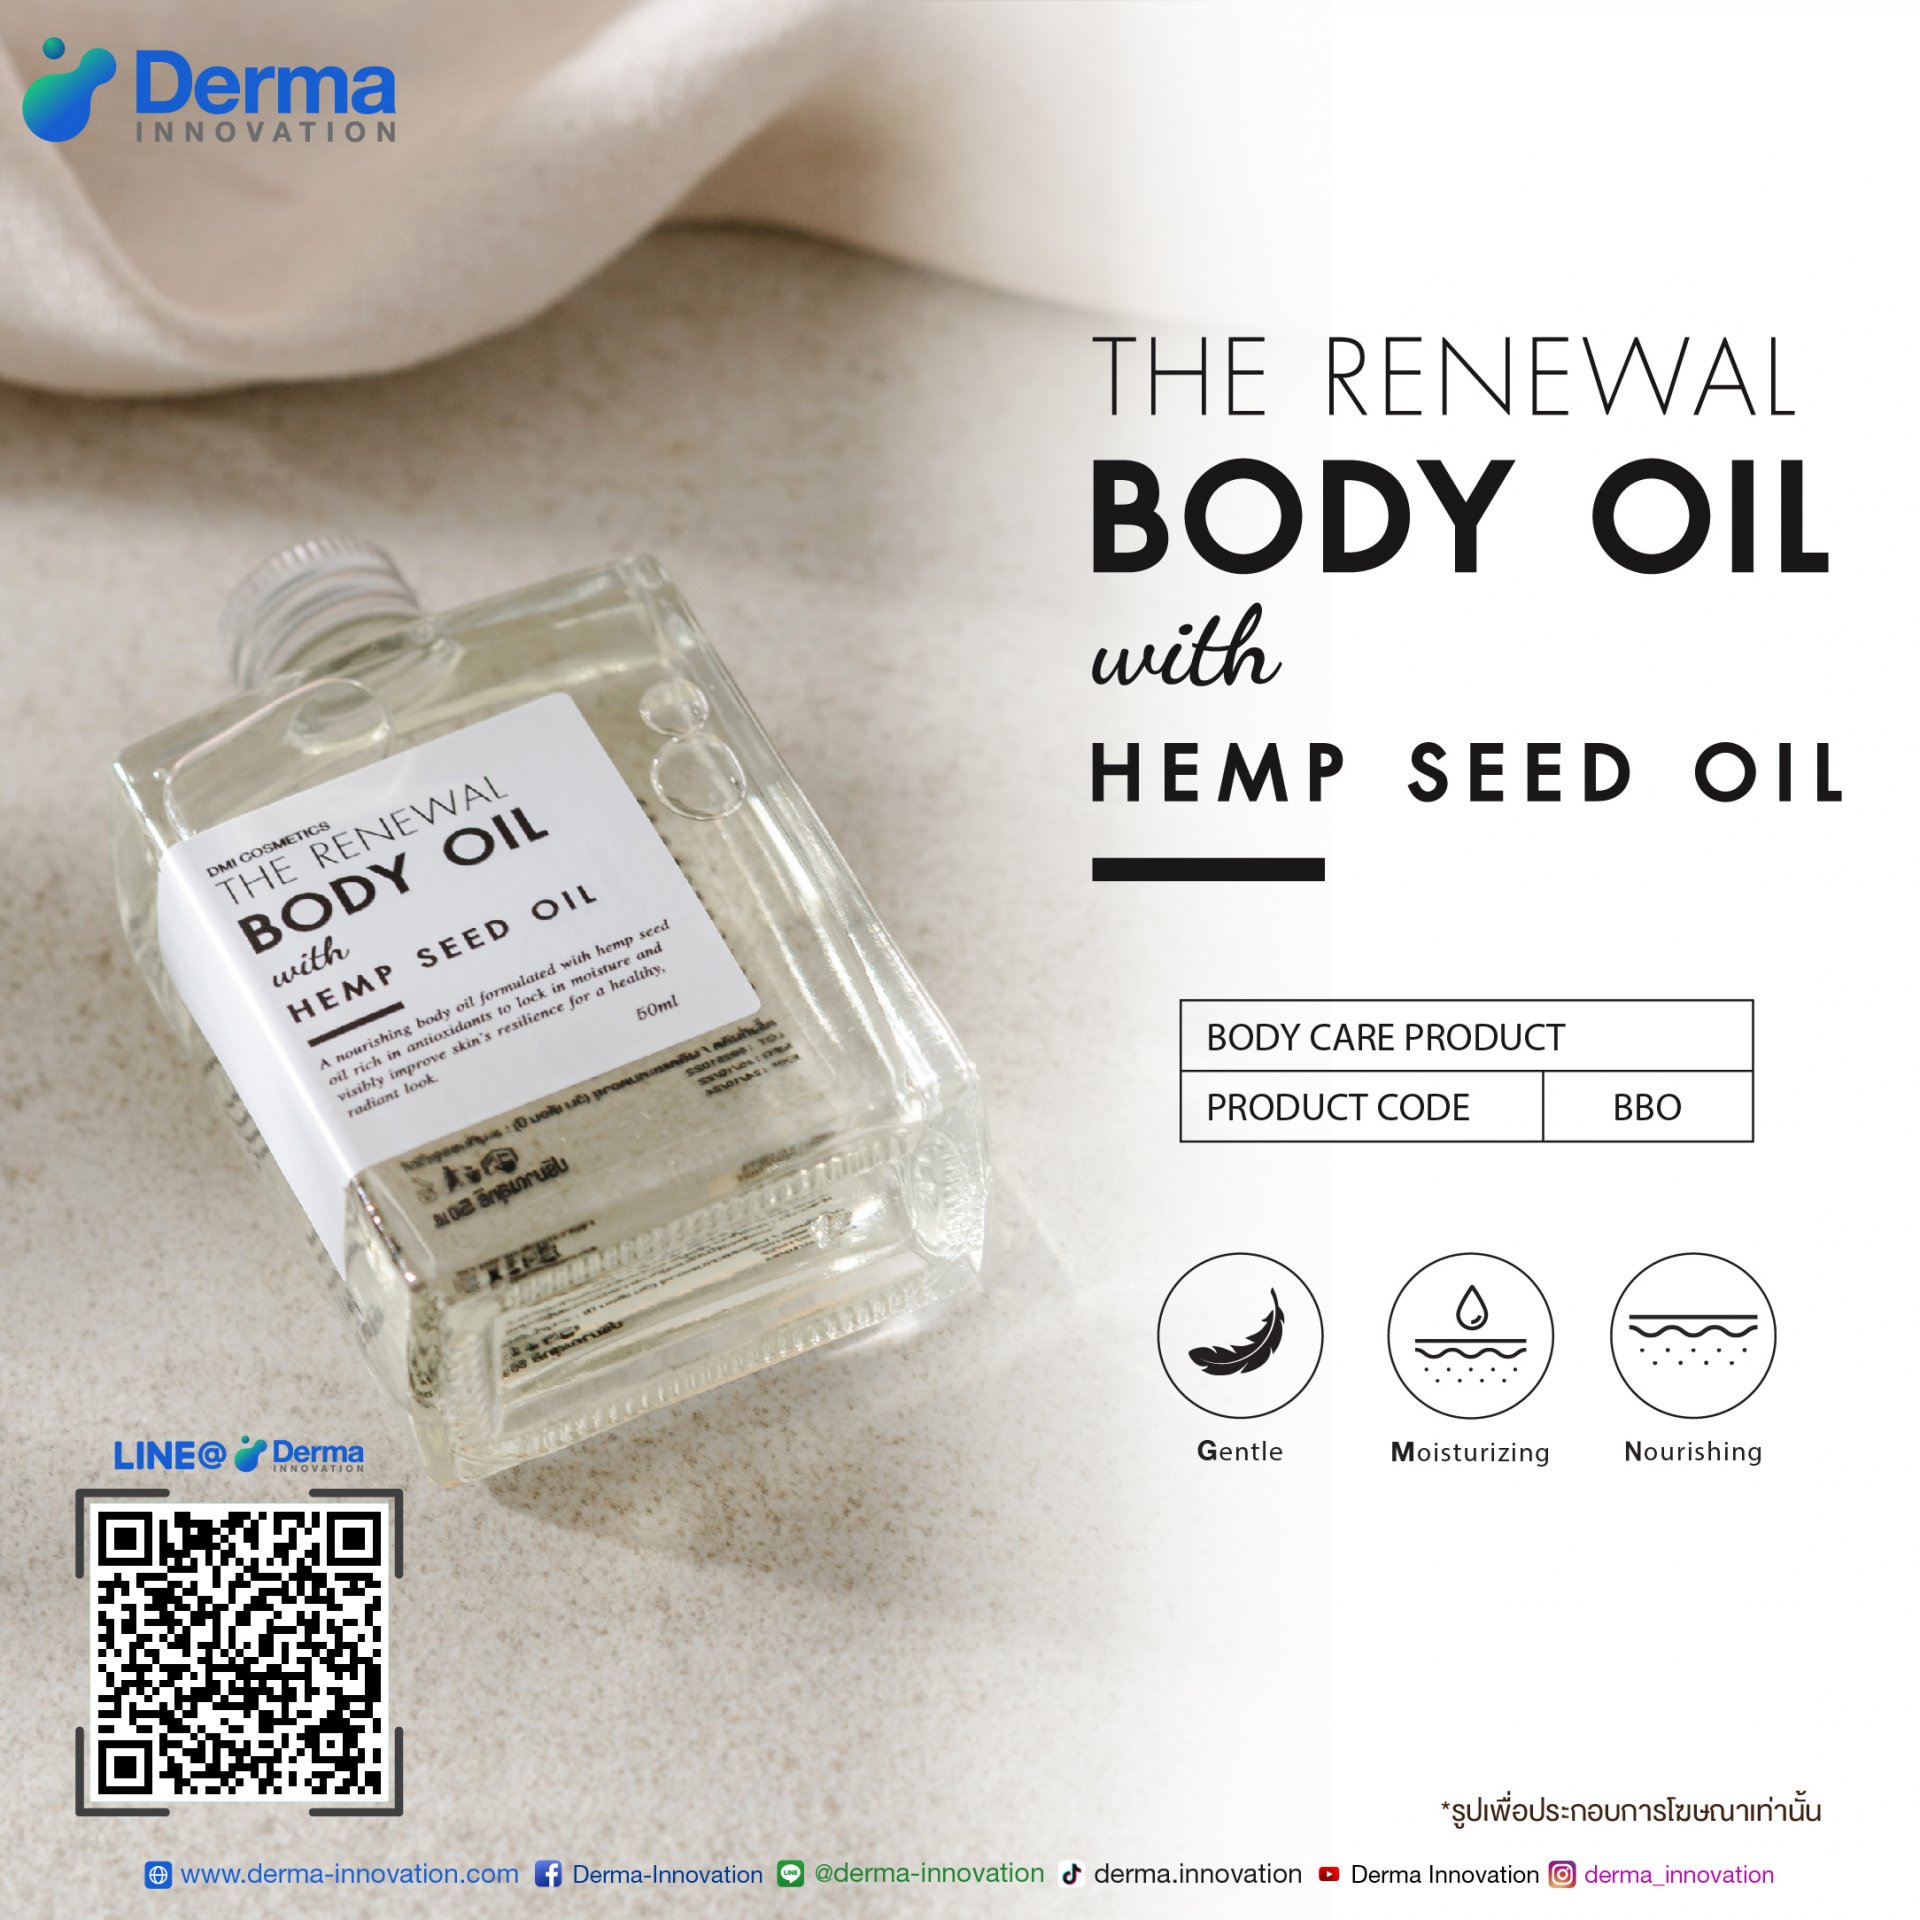 The Renewal Body Oil with Hemp Seed Oil